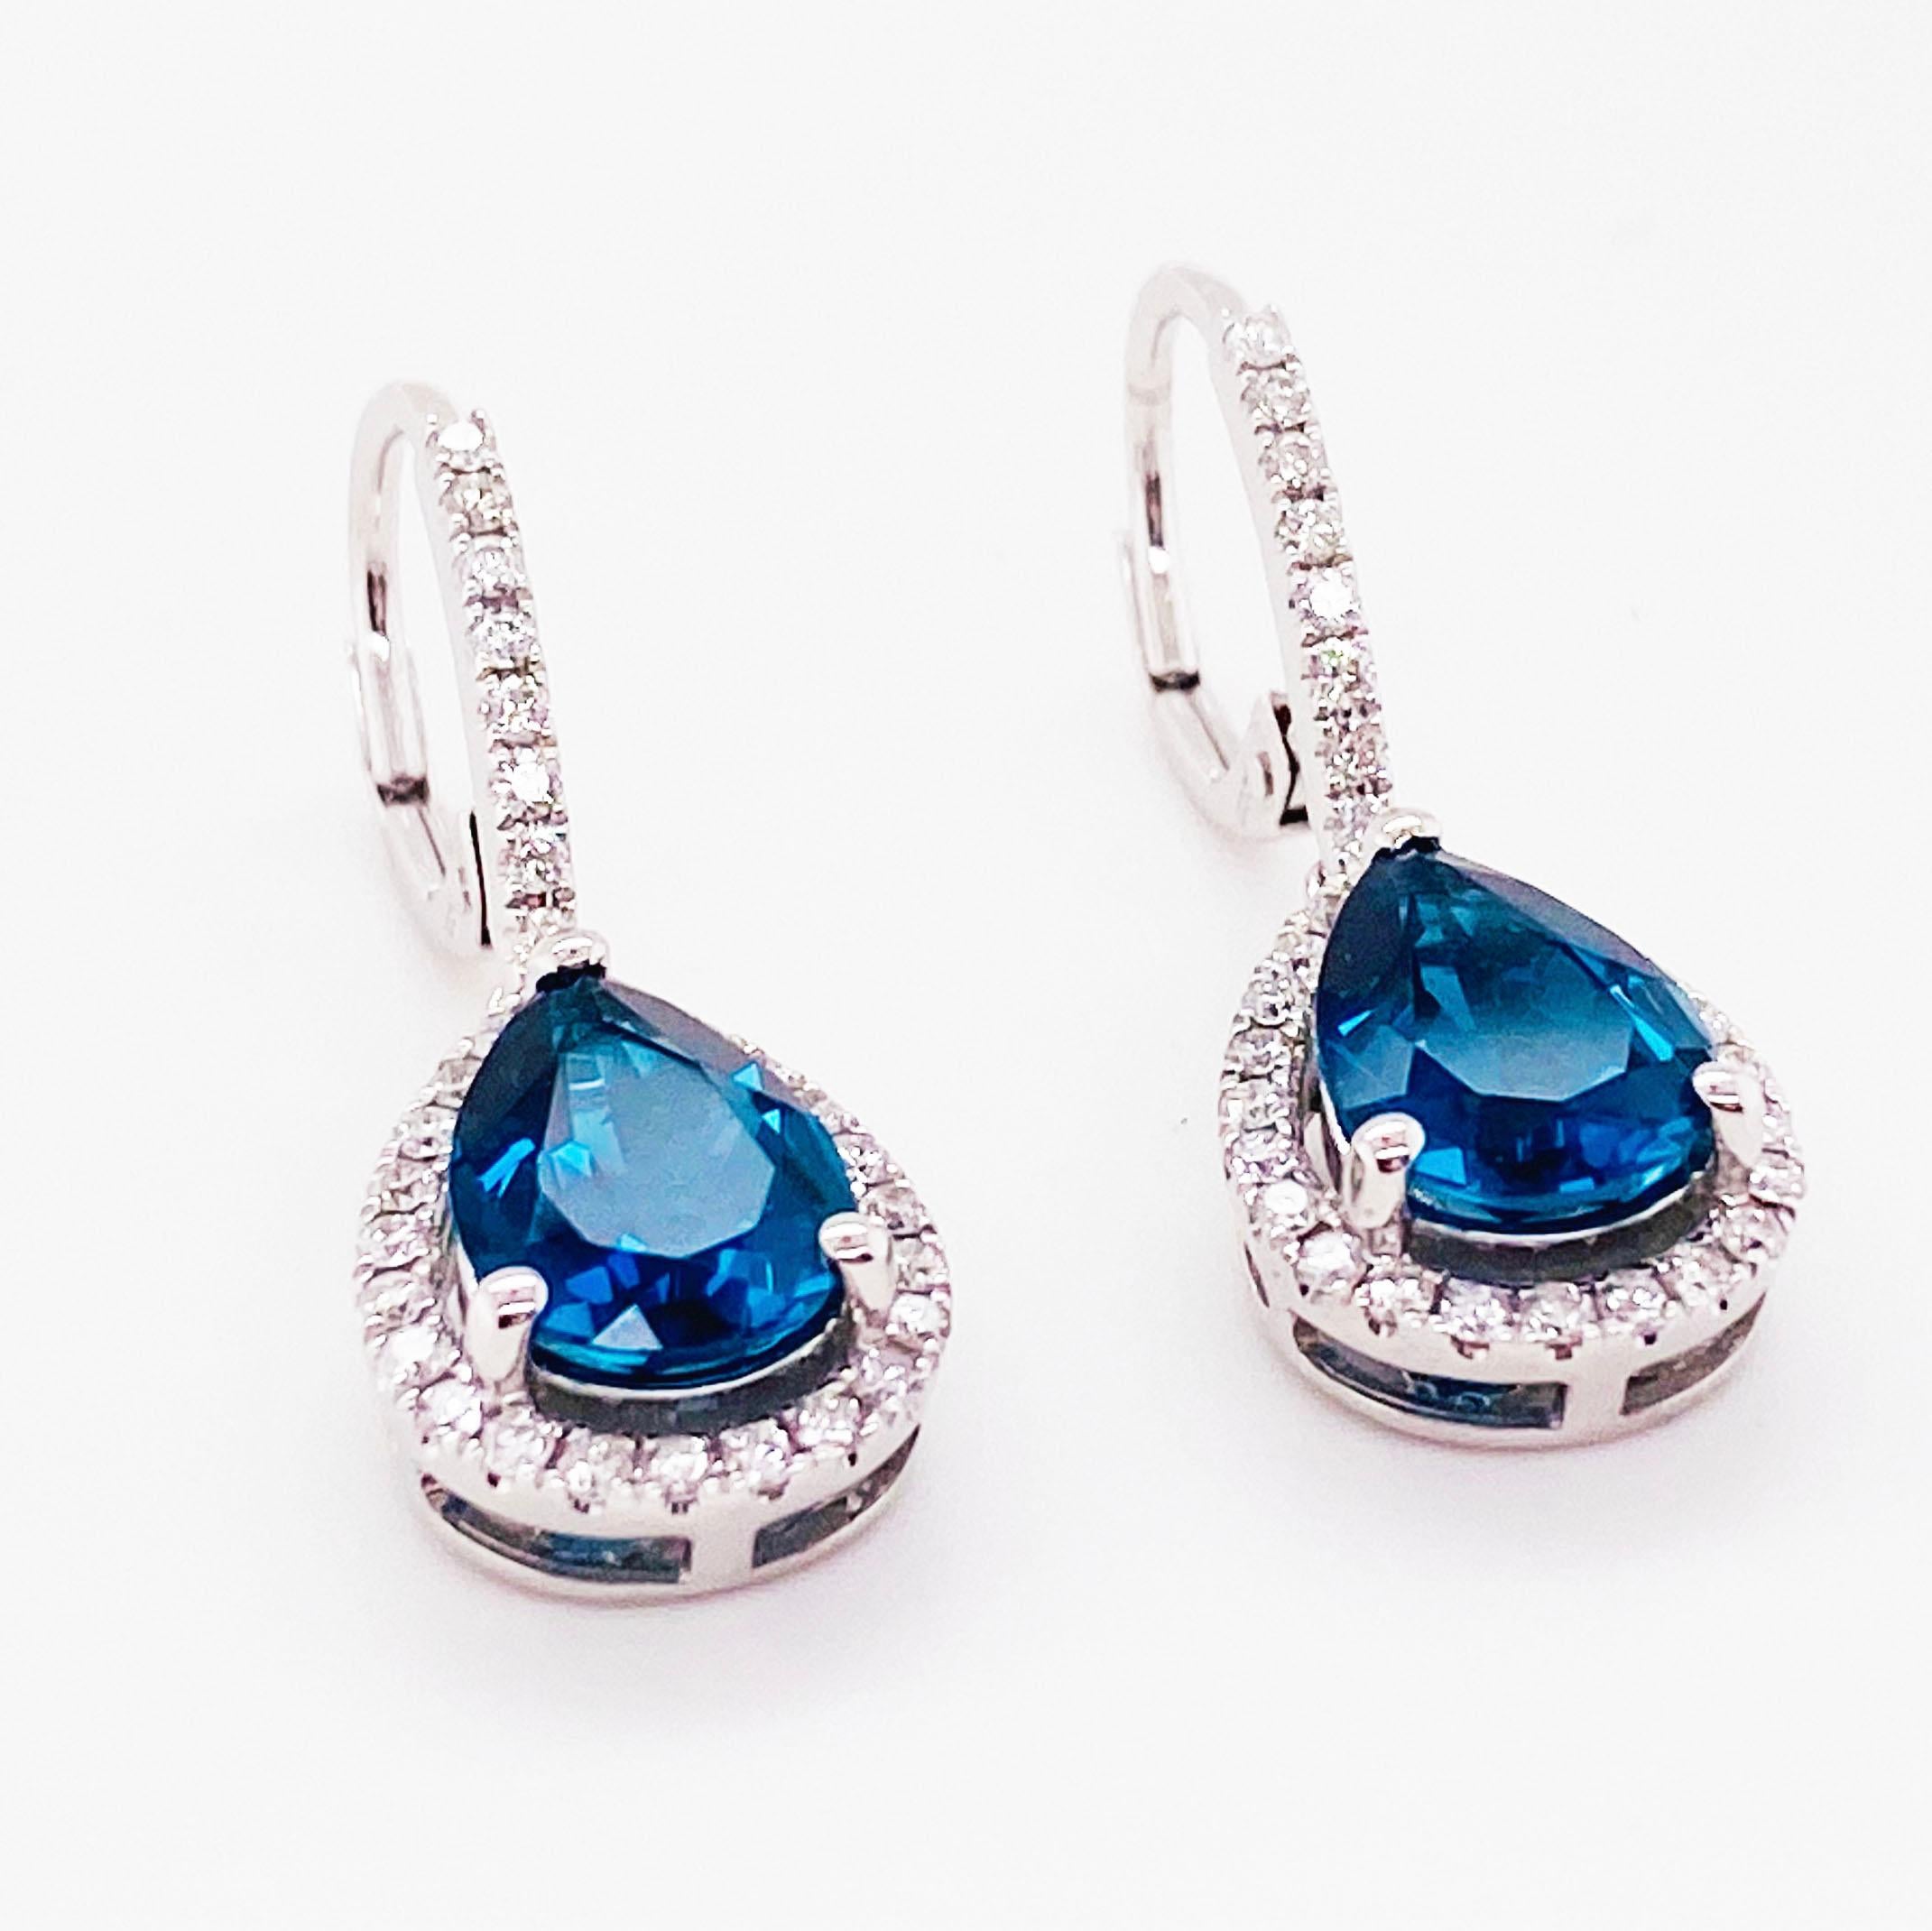 The royal blue topaz earrings are encrusted with diamonds all the way around like a halo setting.  These earrings look like Royalty with the London blue color of topaz!  The genuine gemstones are a teardrop or pear shaped cut.  There are eight